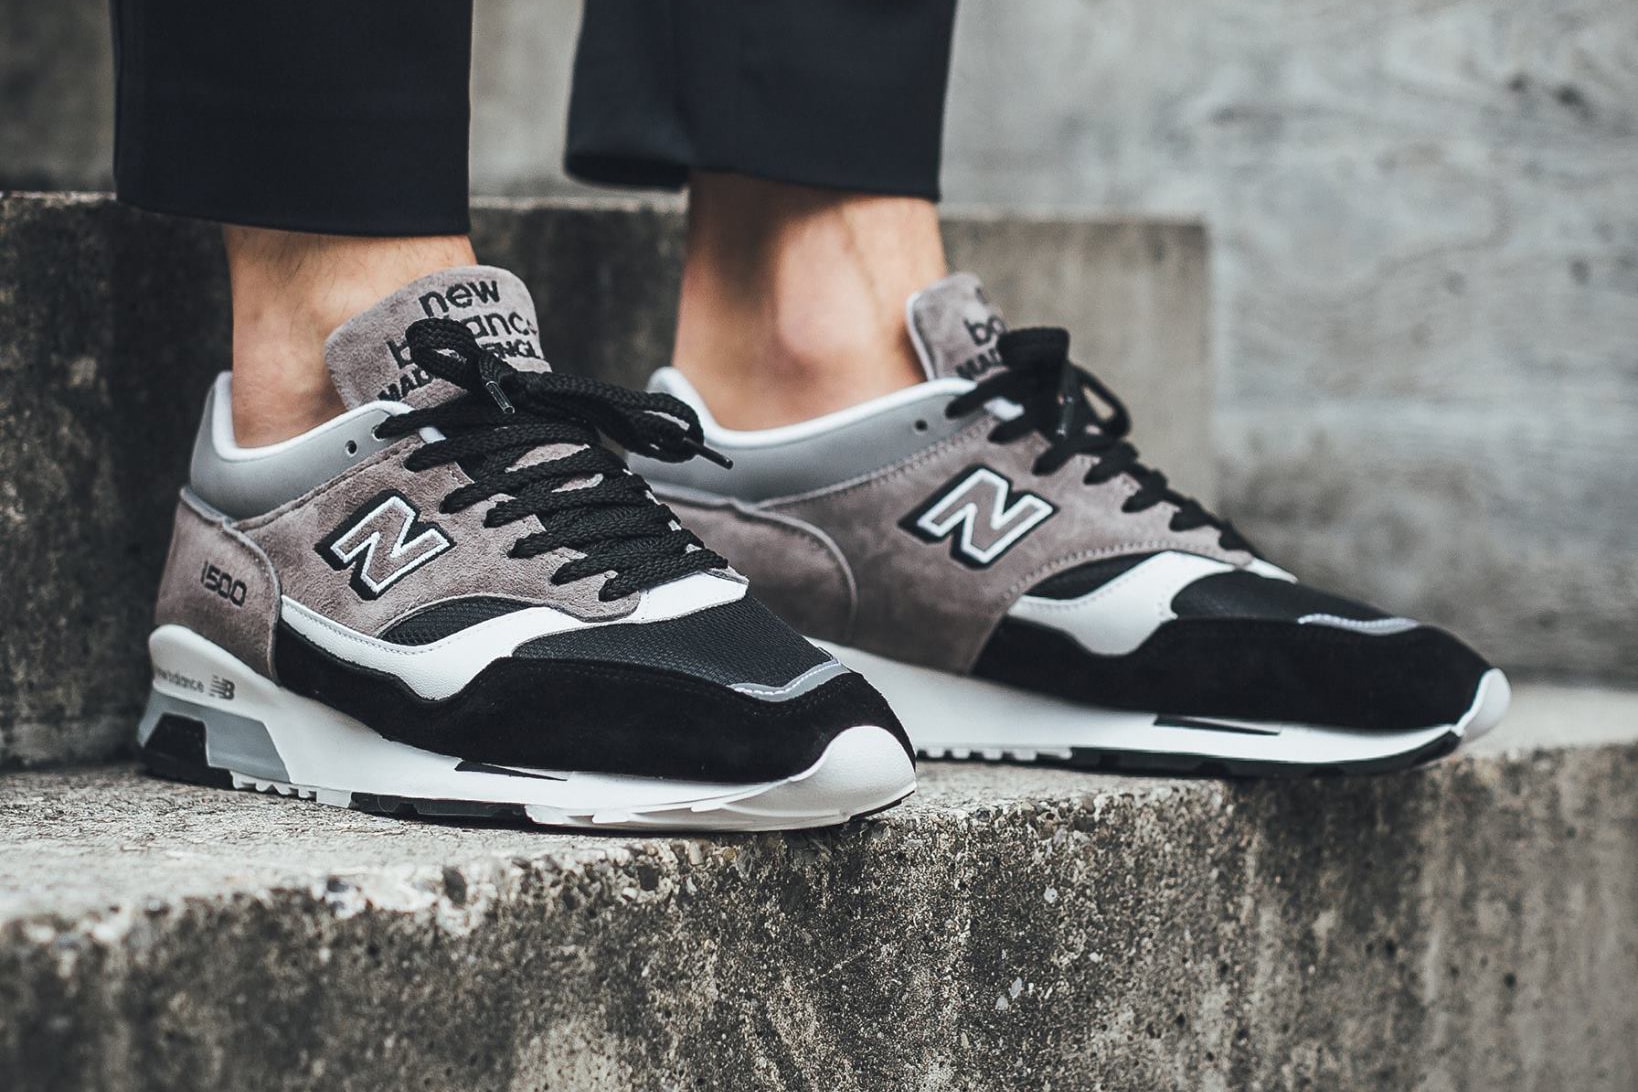 New Balance 1500 Made In England Grey gray Black White sneakers shoes kicks titolo shop release online NB